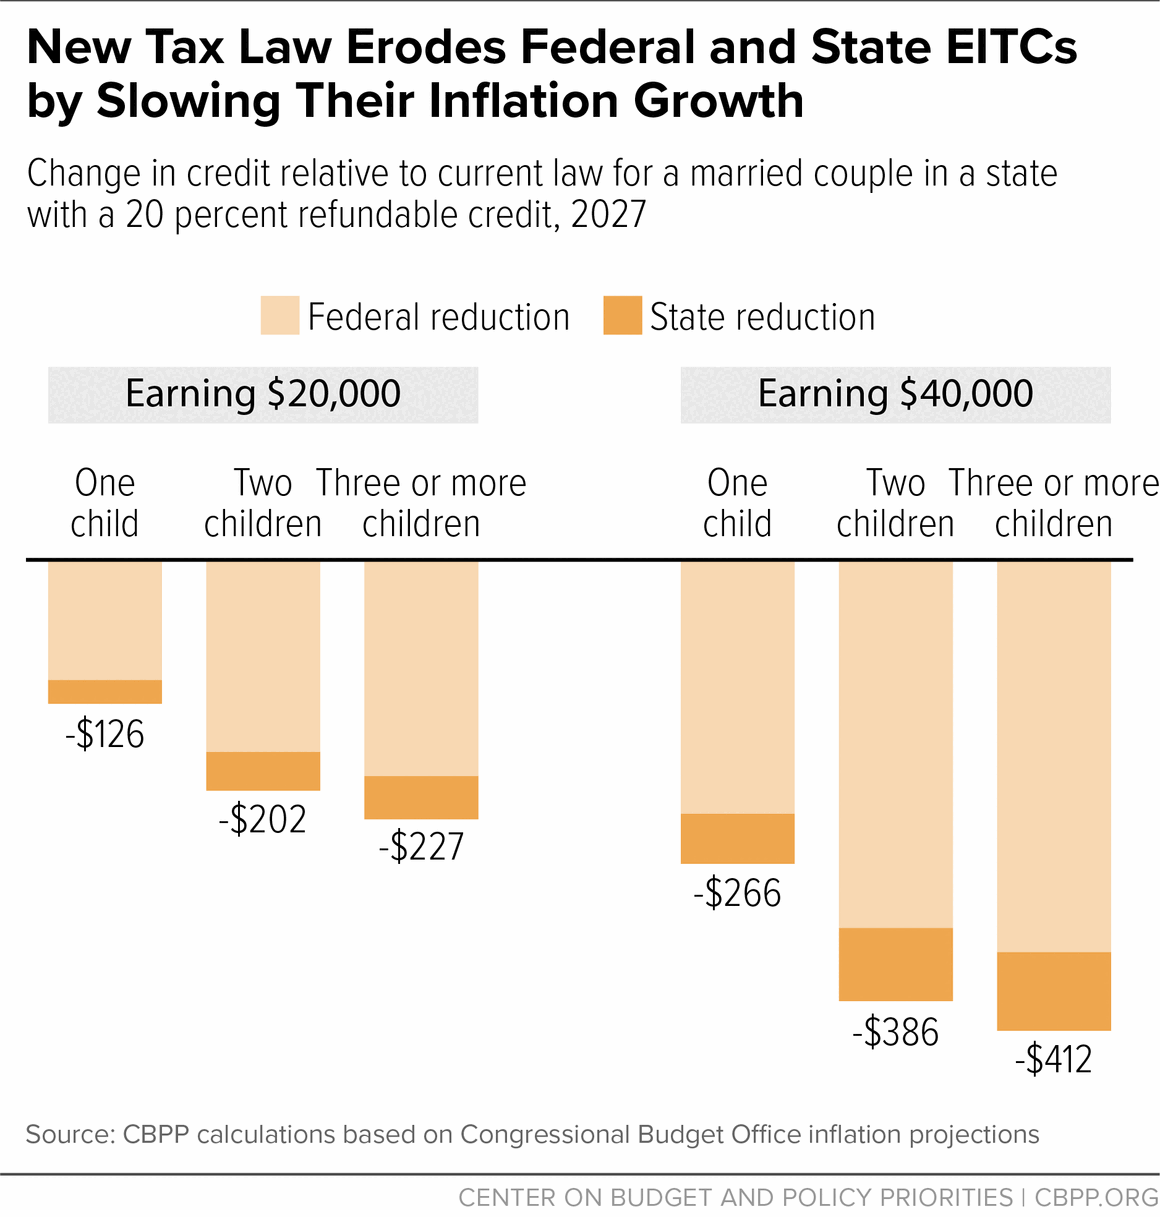 New Tax Law Erodes Federal and State EITCs by Slowing Their Inflation Growth